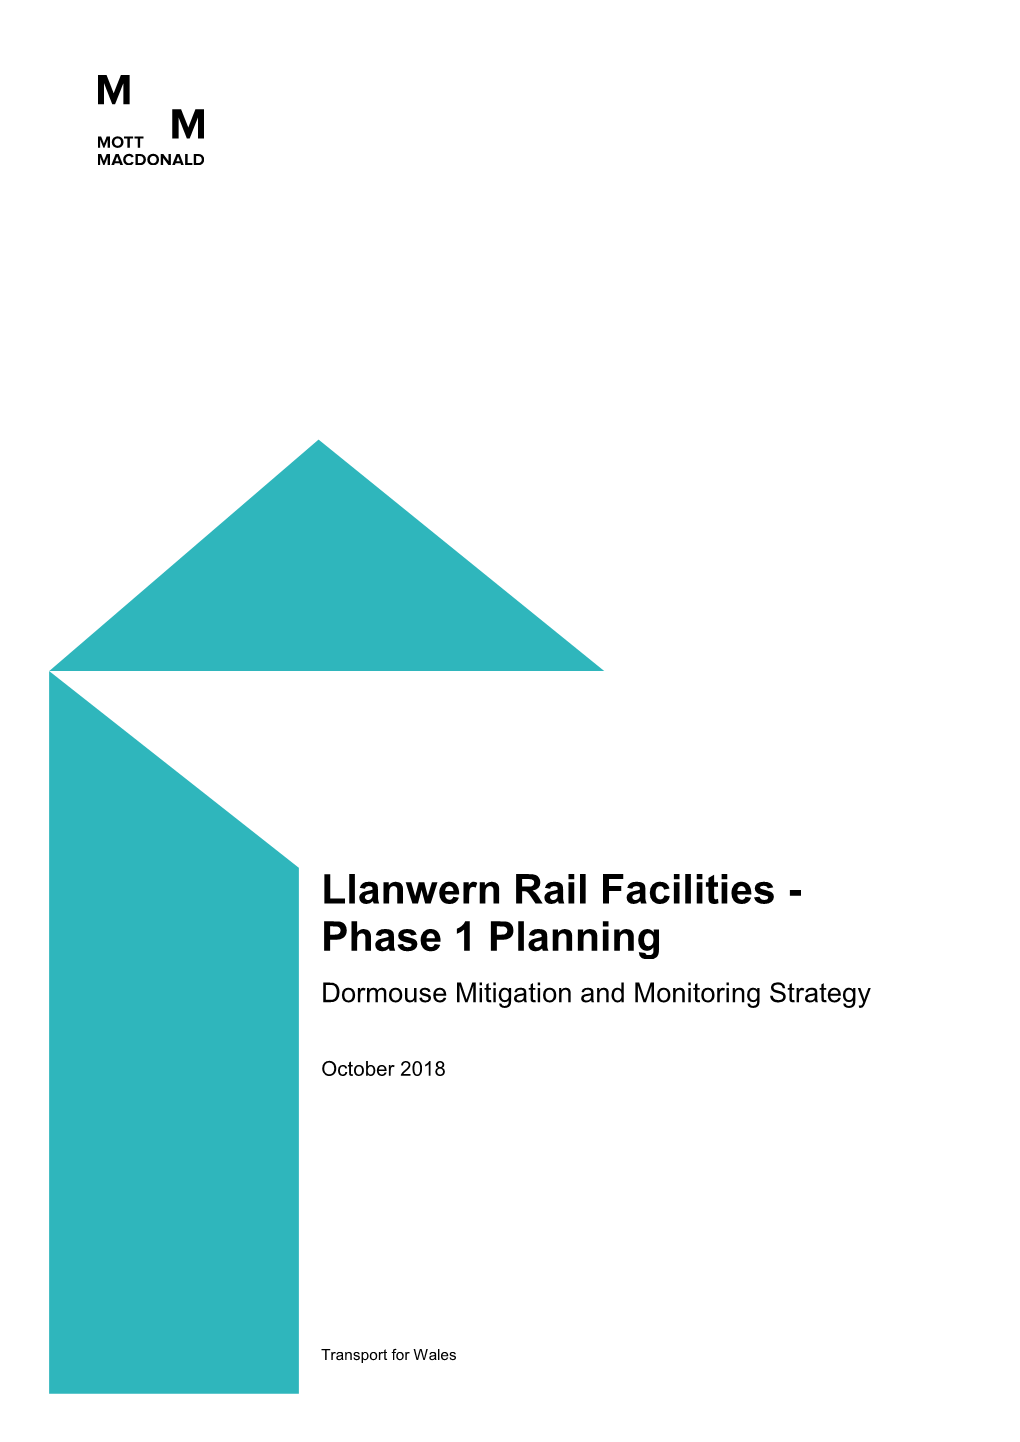 Llanwern Rail Facilities - Phase 1 Planning Dormouse Mitigation and Monitoring Strategy